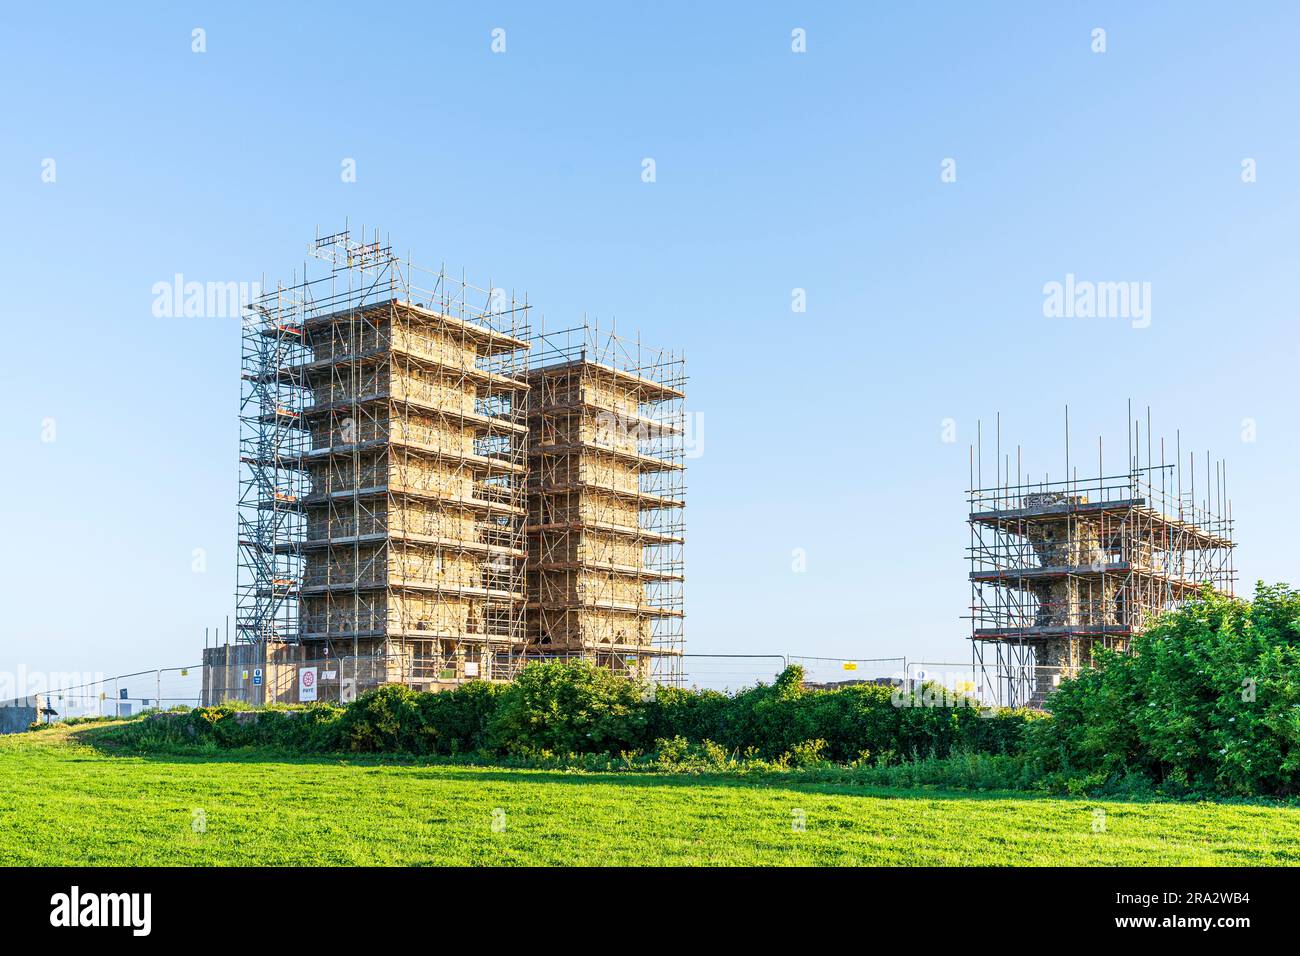 The landmark twin tower Angelo Saxon church ruins on the Kent coast at Reculver, covered over in scaffolding during conservation and restoration work. Stock Photo